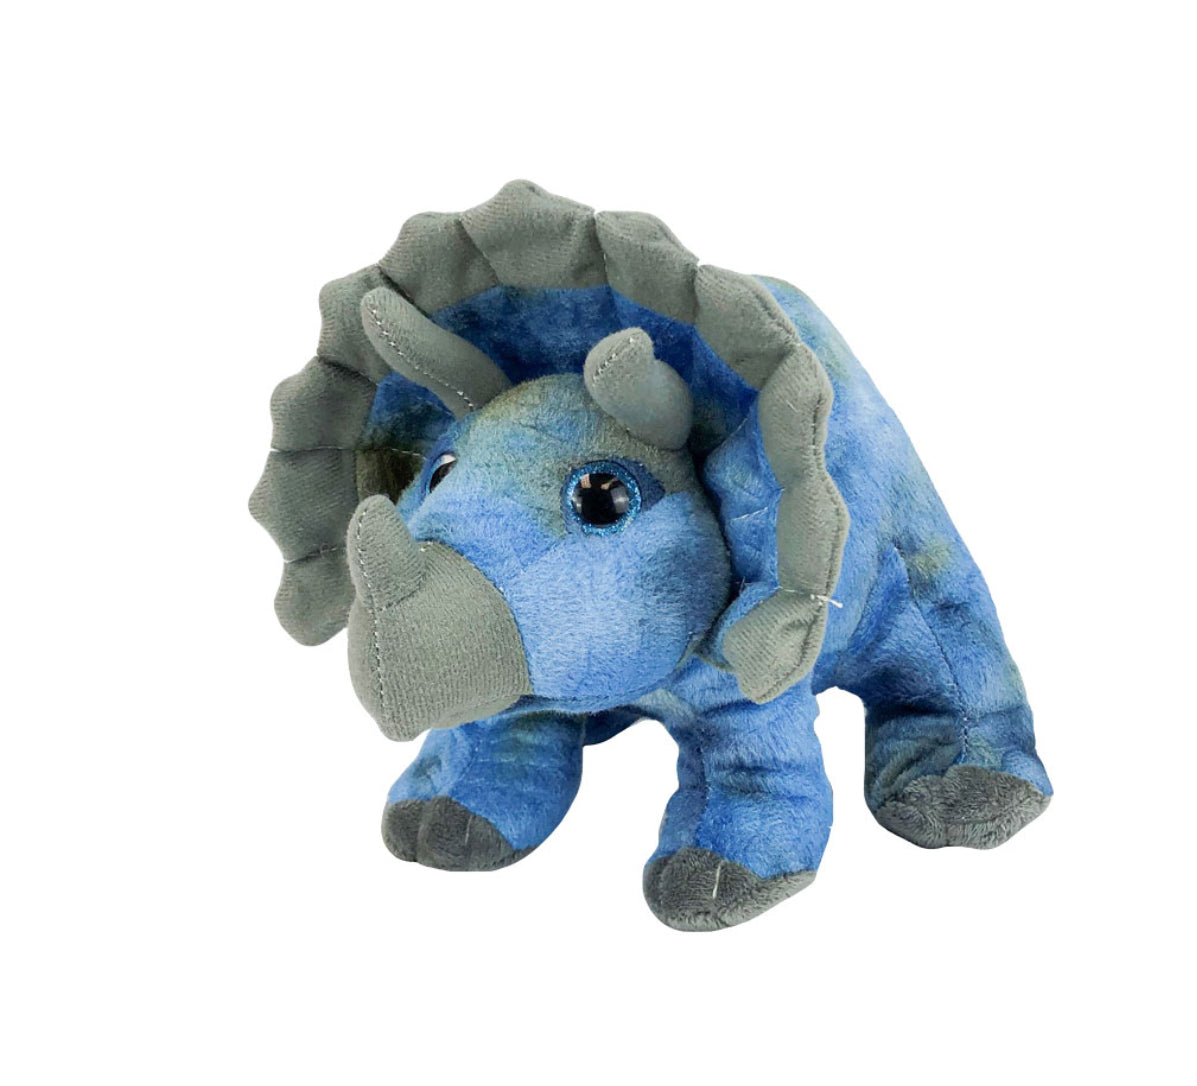 8” Stella the Triceratops